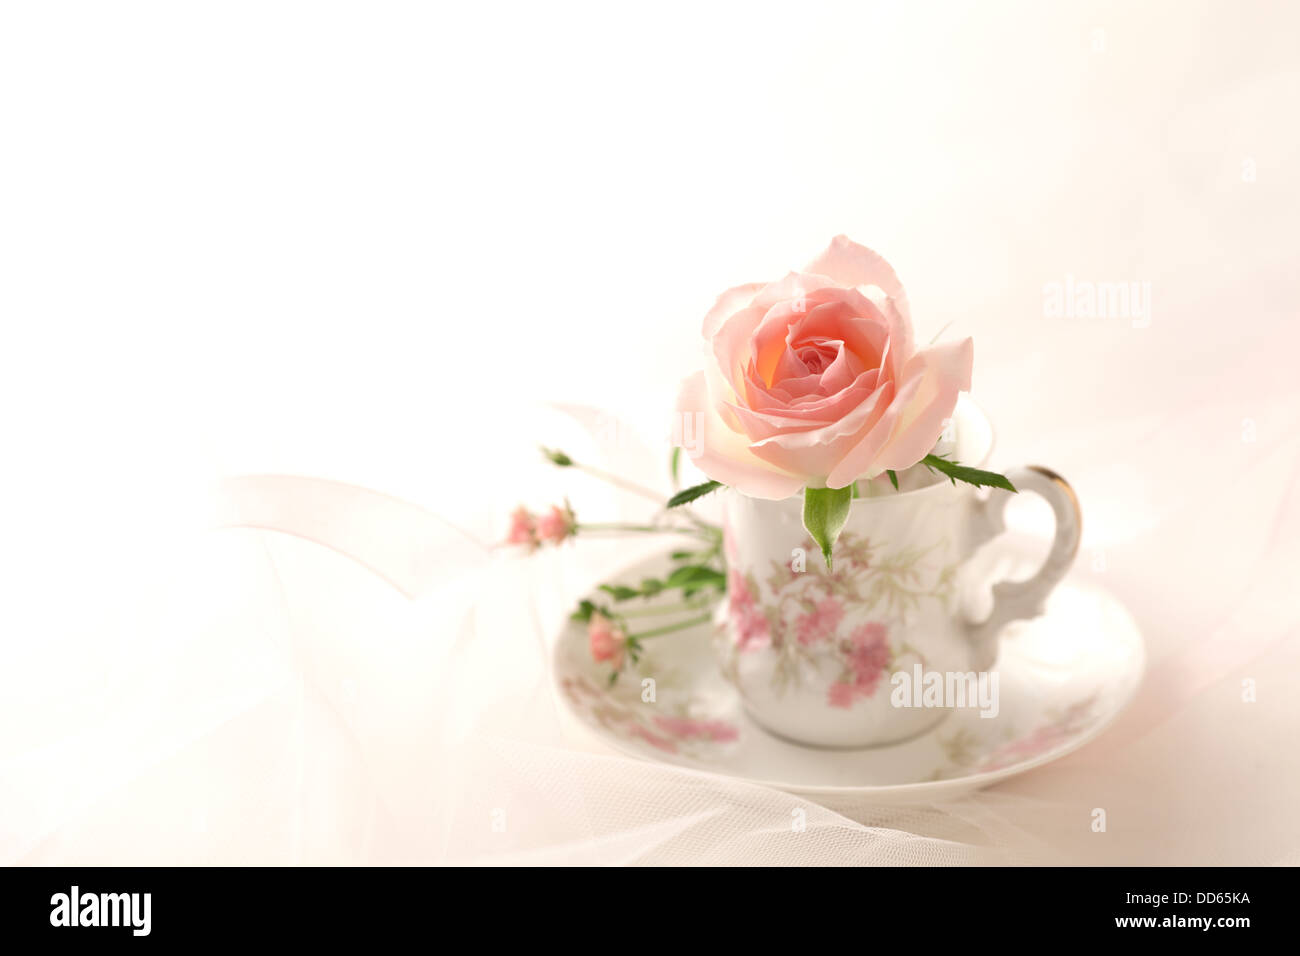 Tea cup and rose Stock Photo